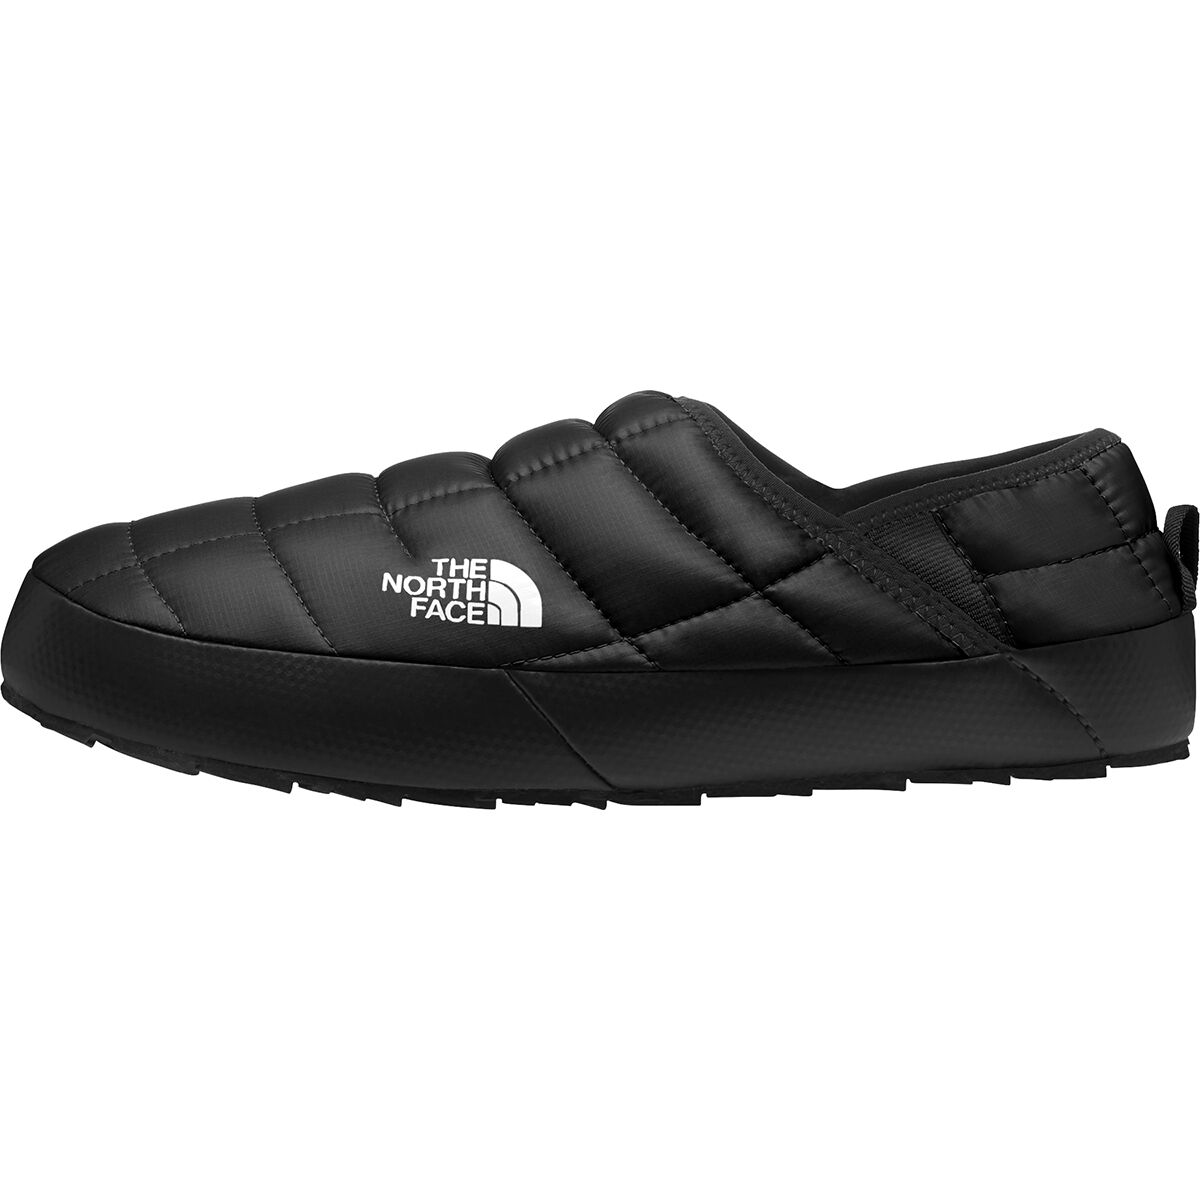 The North Face Men's Thermoball Traction Mule V Slippers Hot Sale 